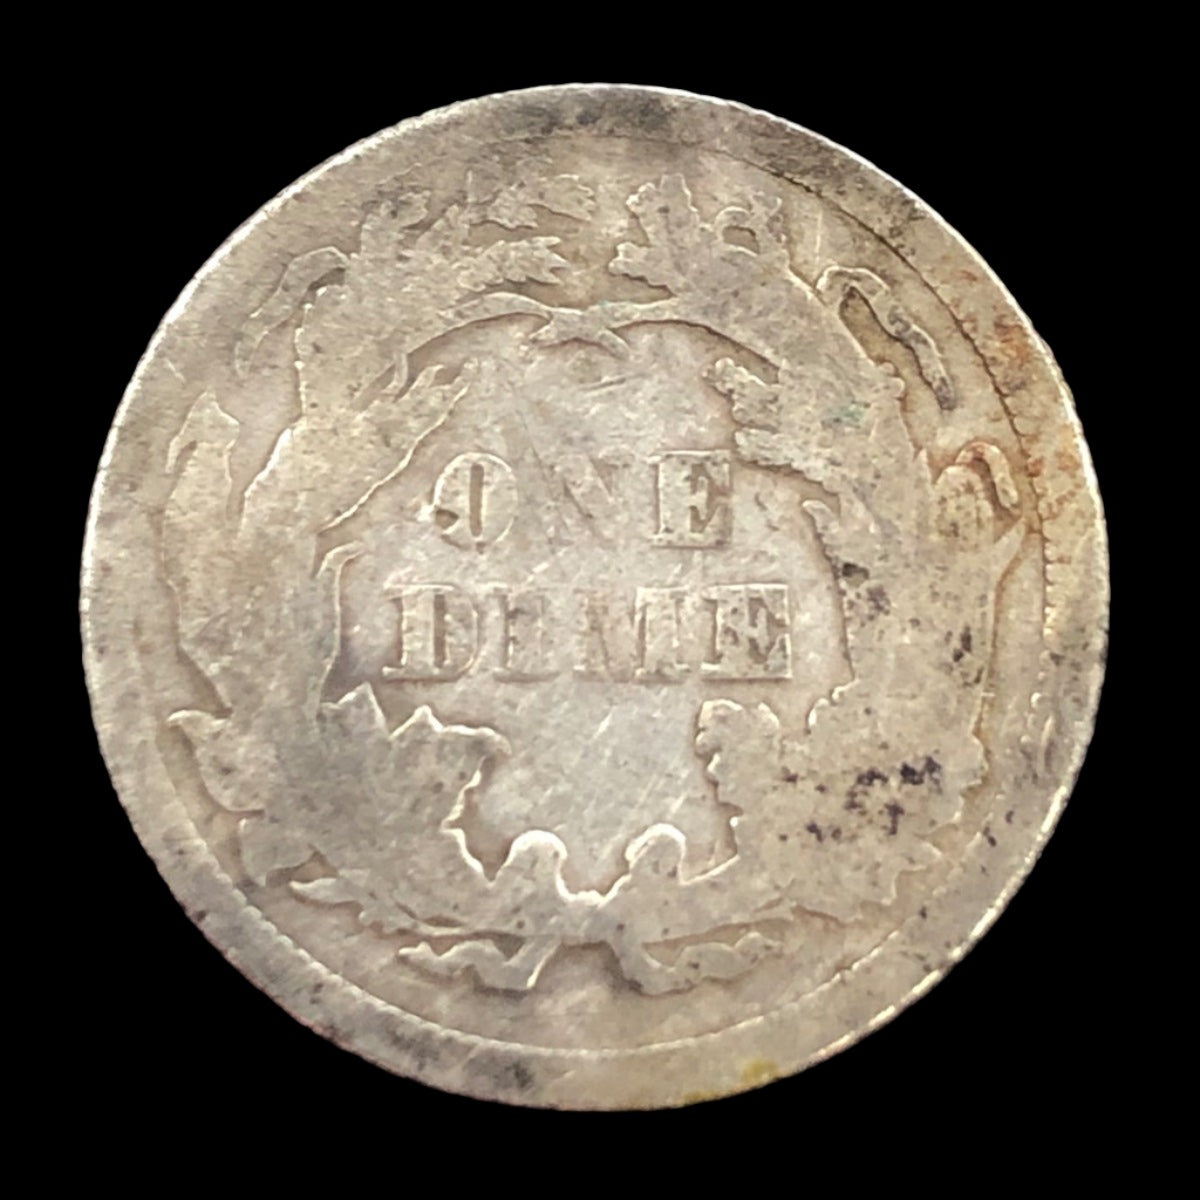 1873 Closed 3 Seated Liberty Dime (VG Details)